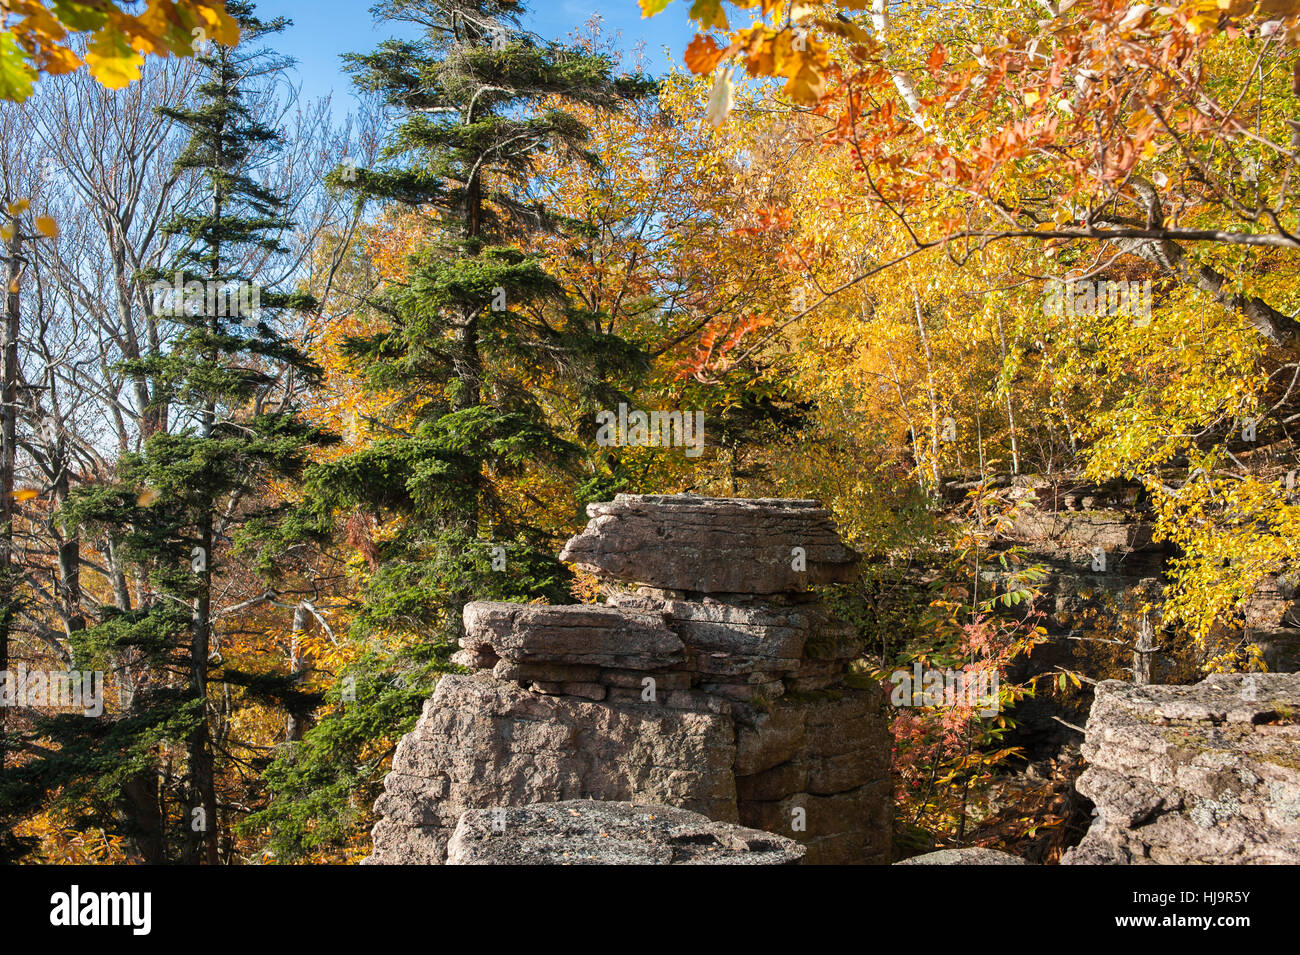 europe, autumnal, rock, woods, forested, black forest, autumn foliage, rocky, Stock Photo